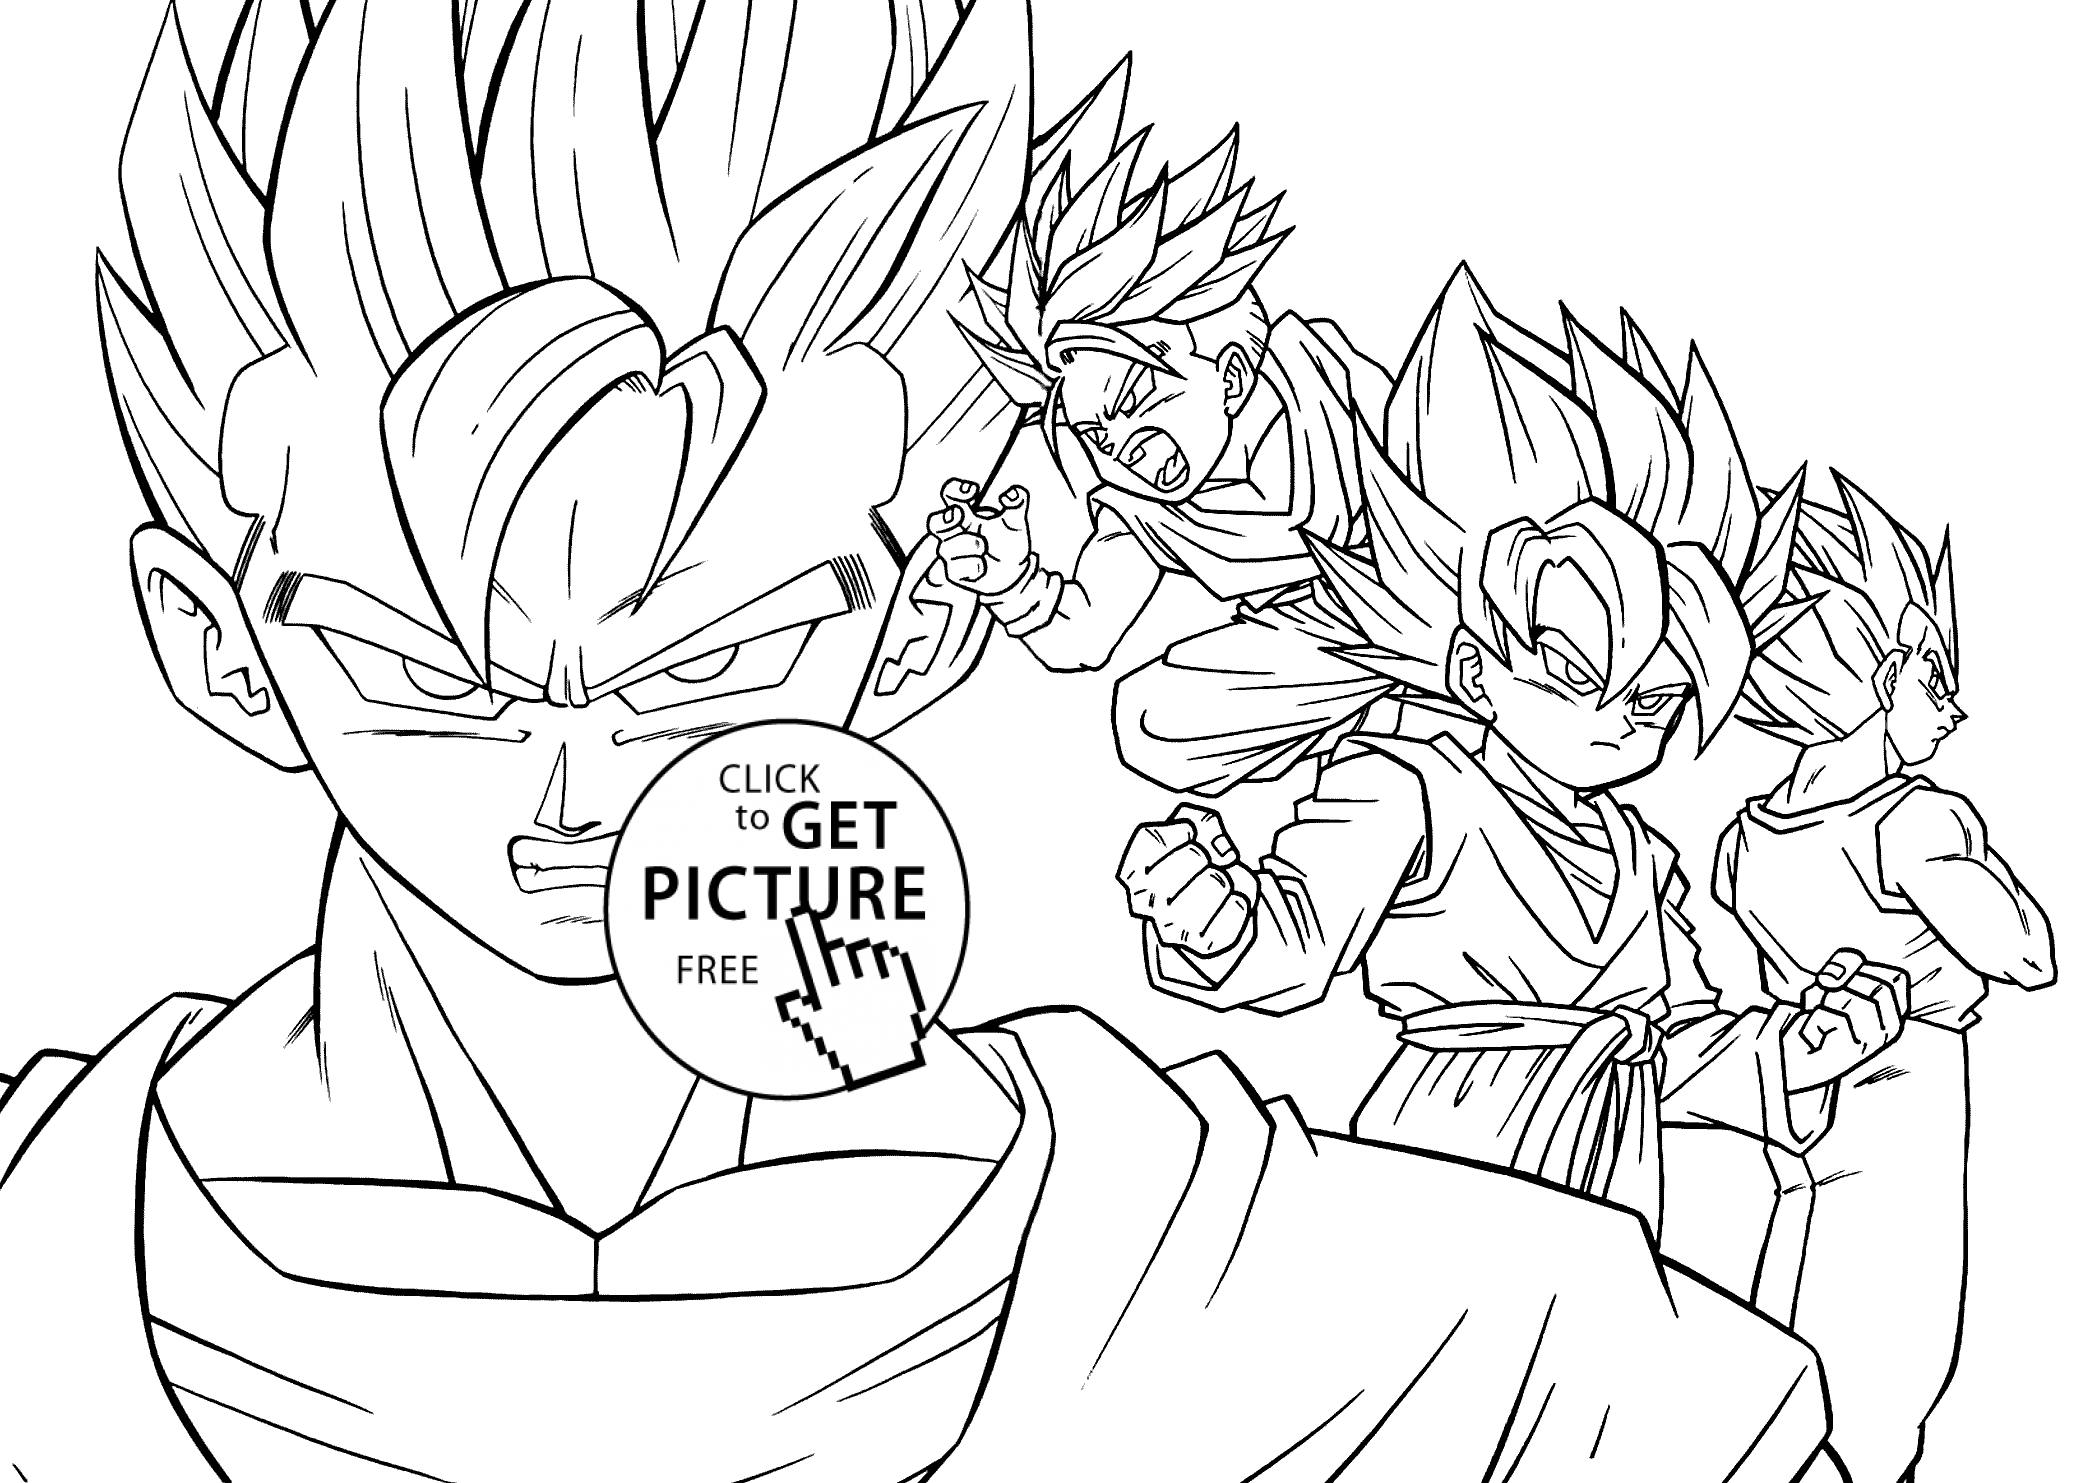 Goten Dragon ball Z anime| Coloring Pages for Kids, printable free